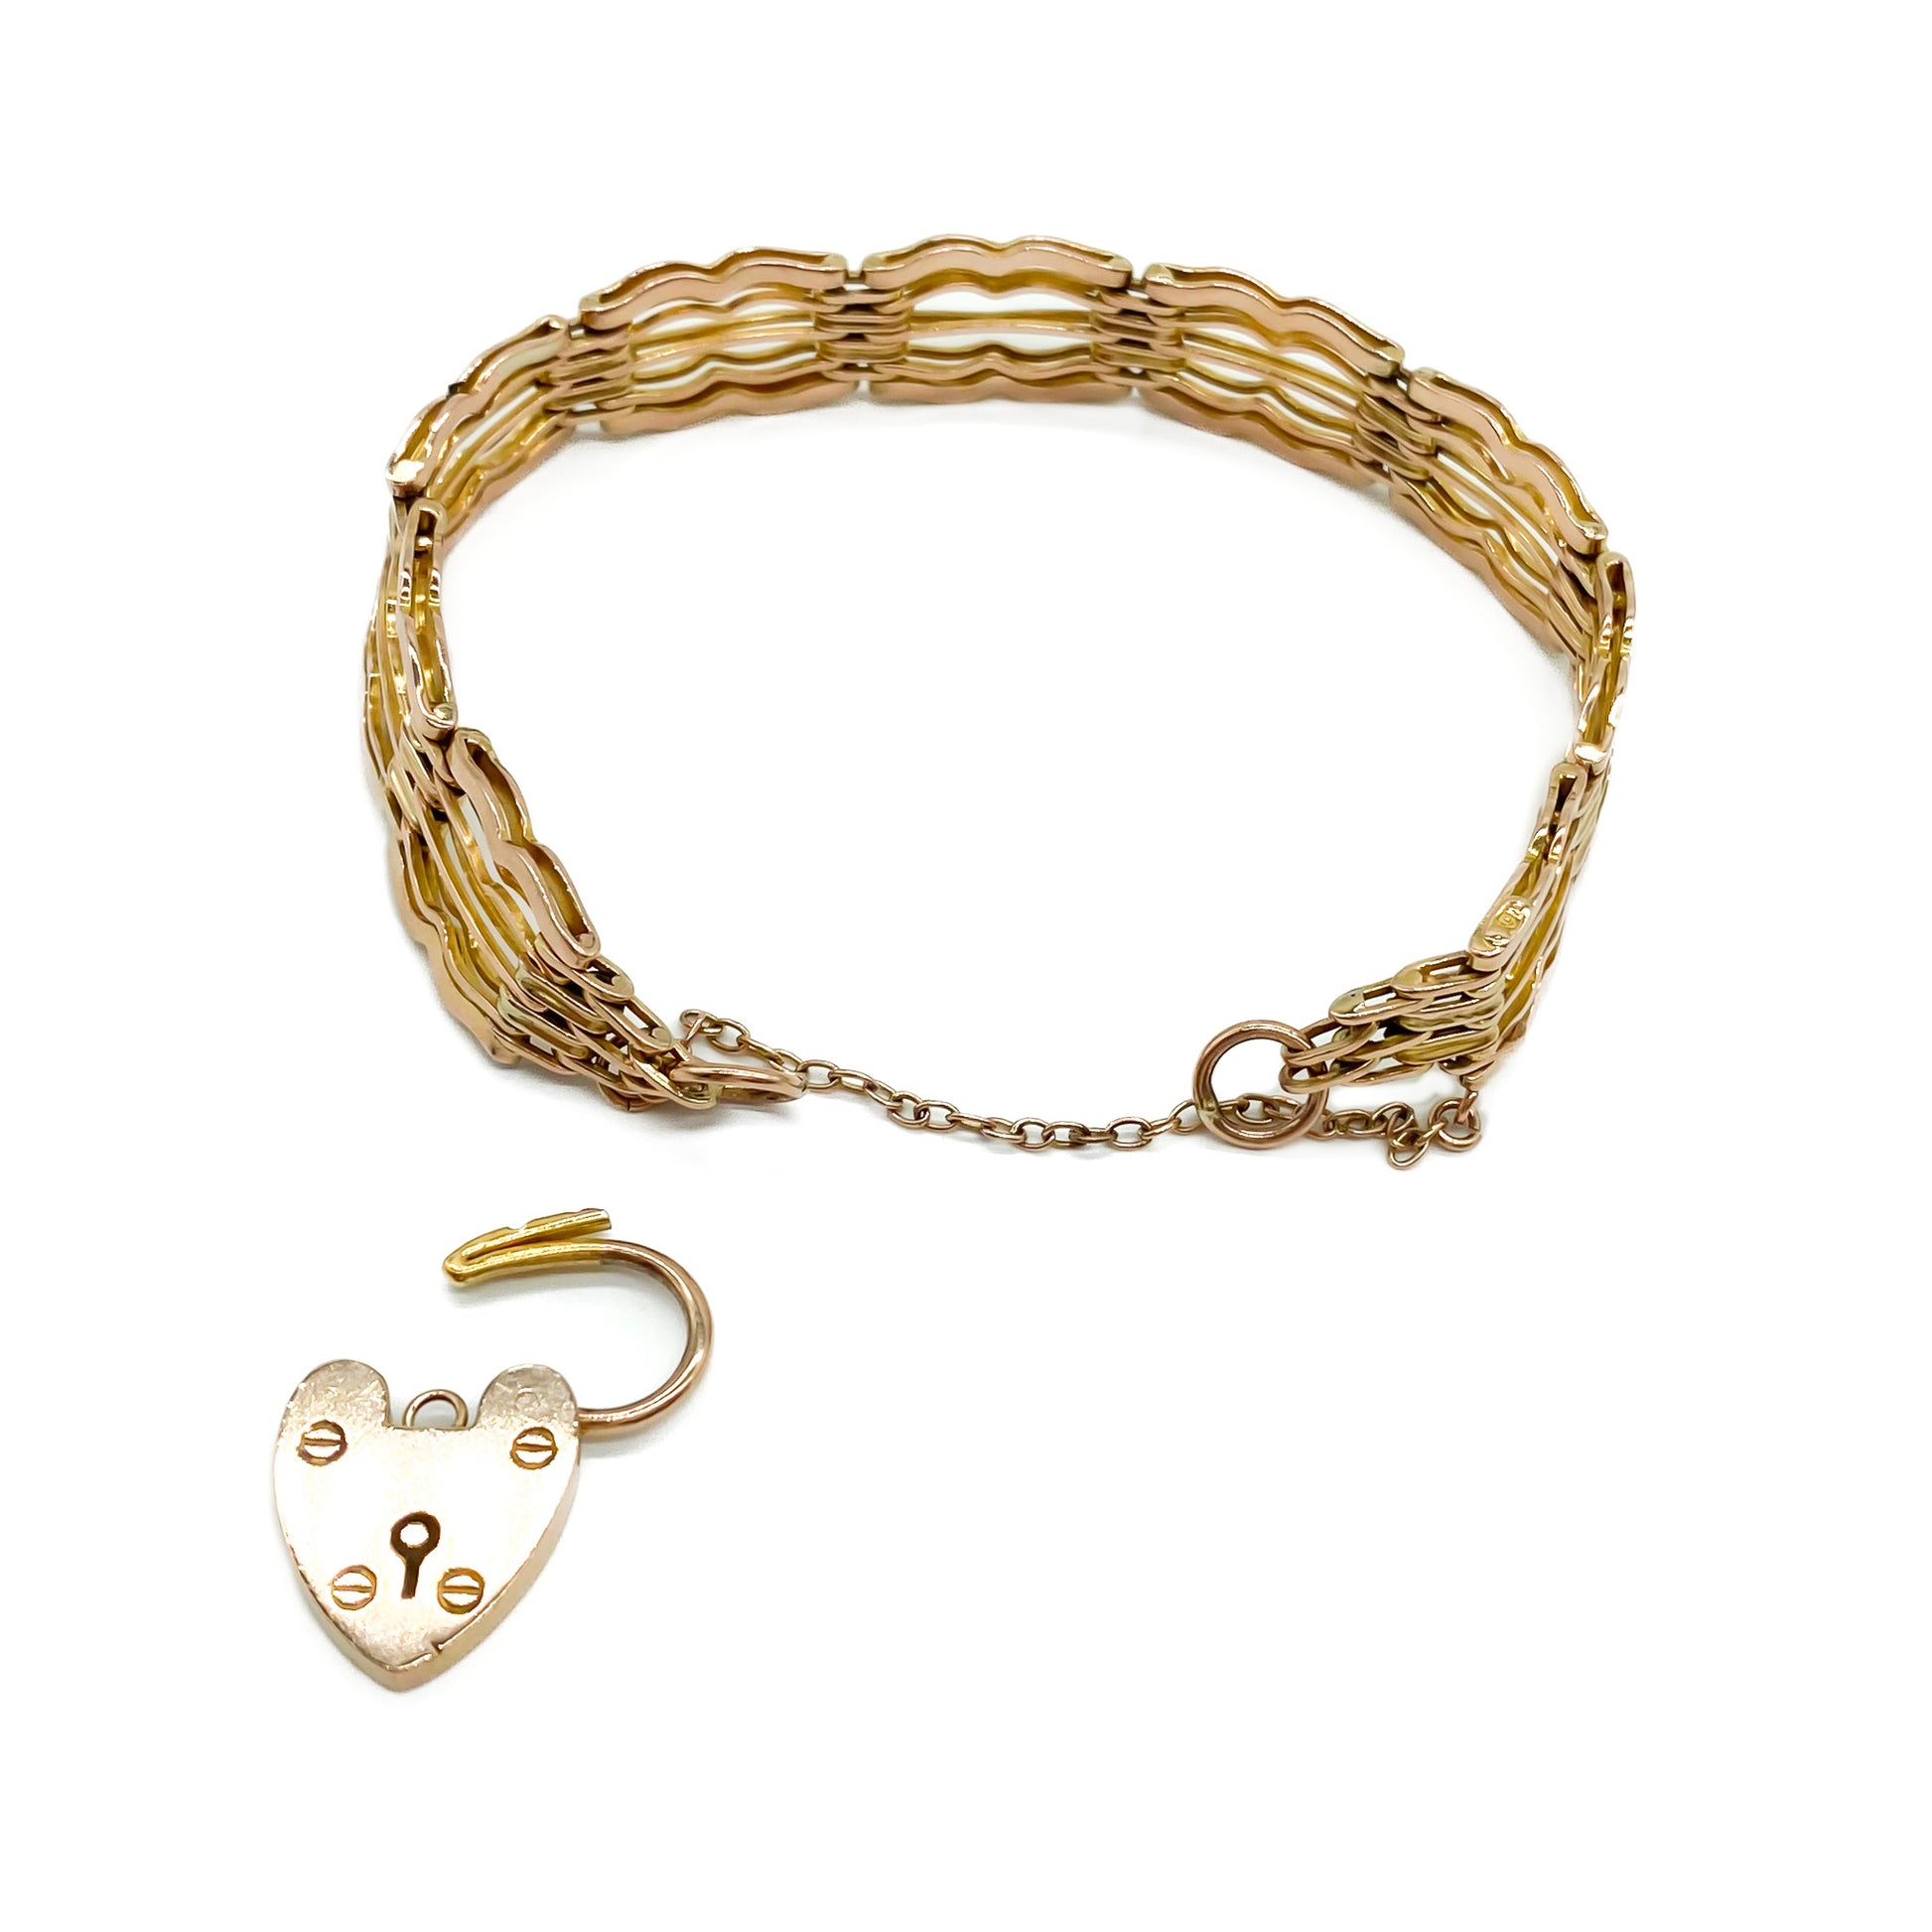 Stylish Victorian 9ct rose gold gateleg bracelet with a padlock and safety chain.